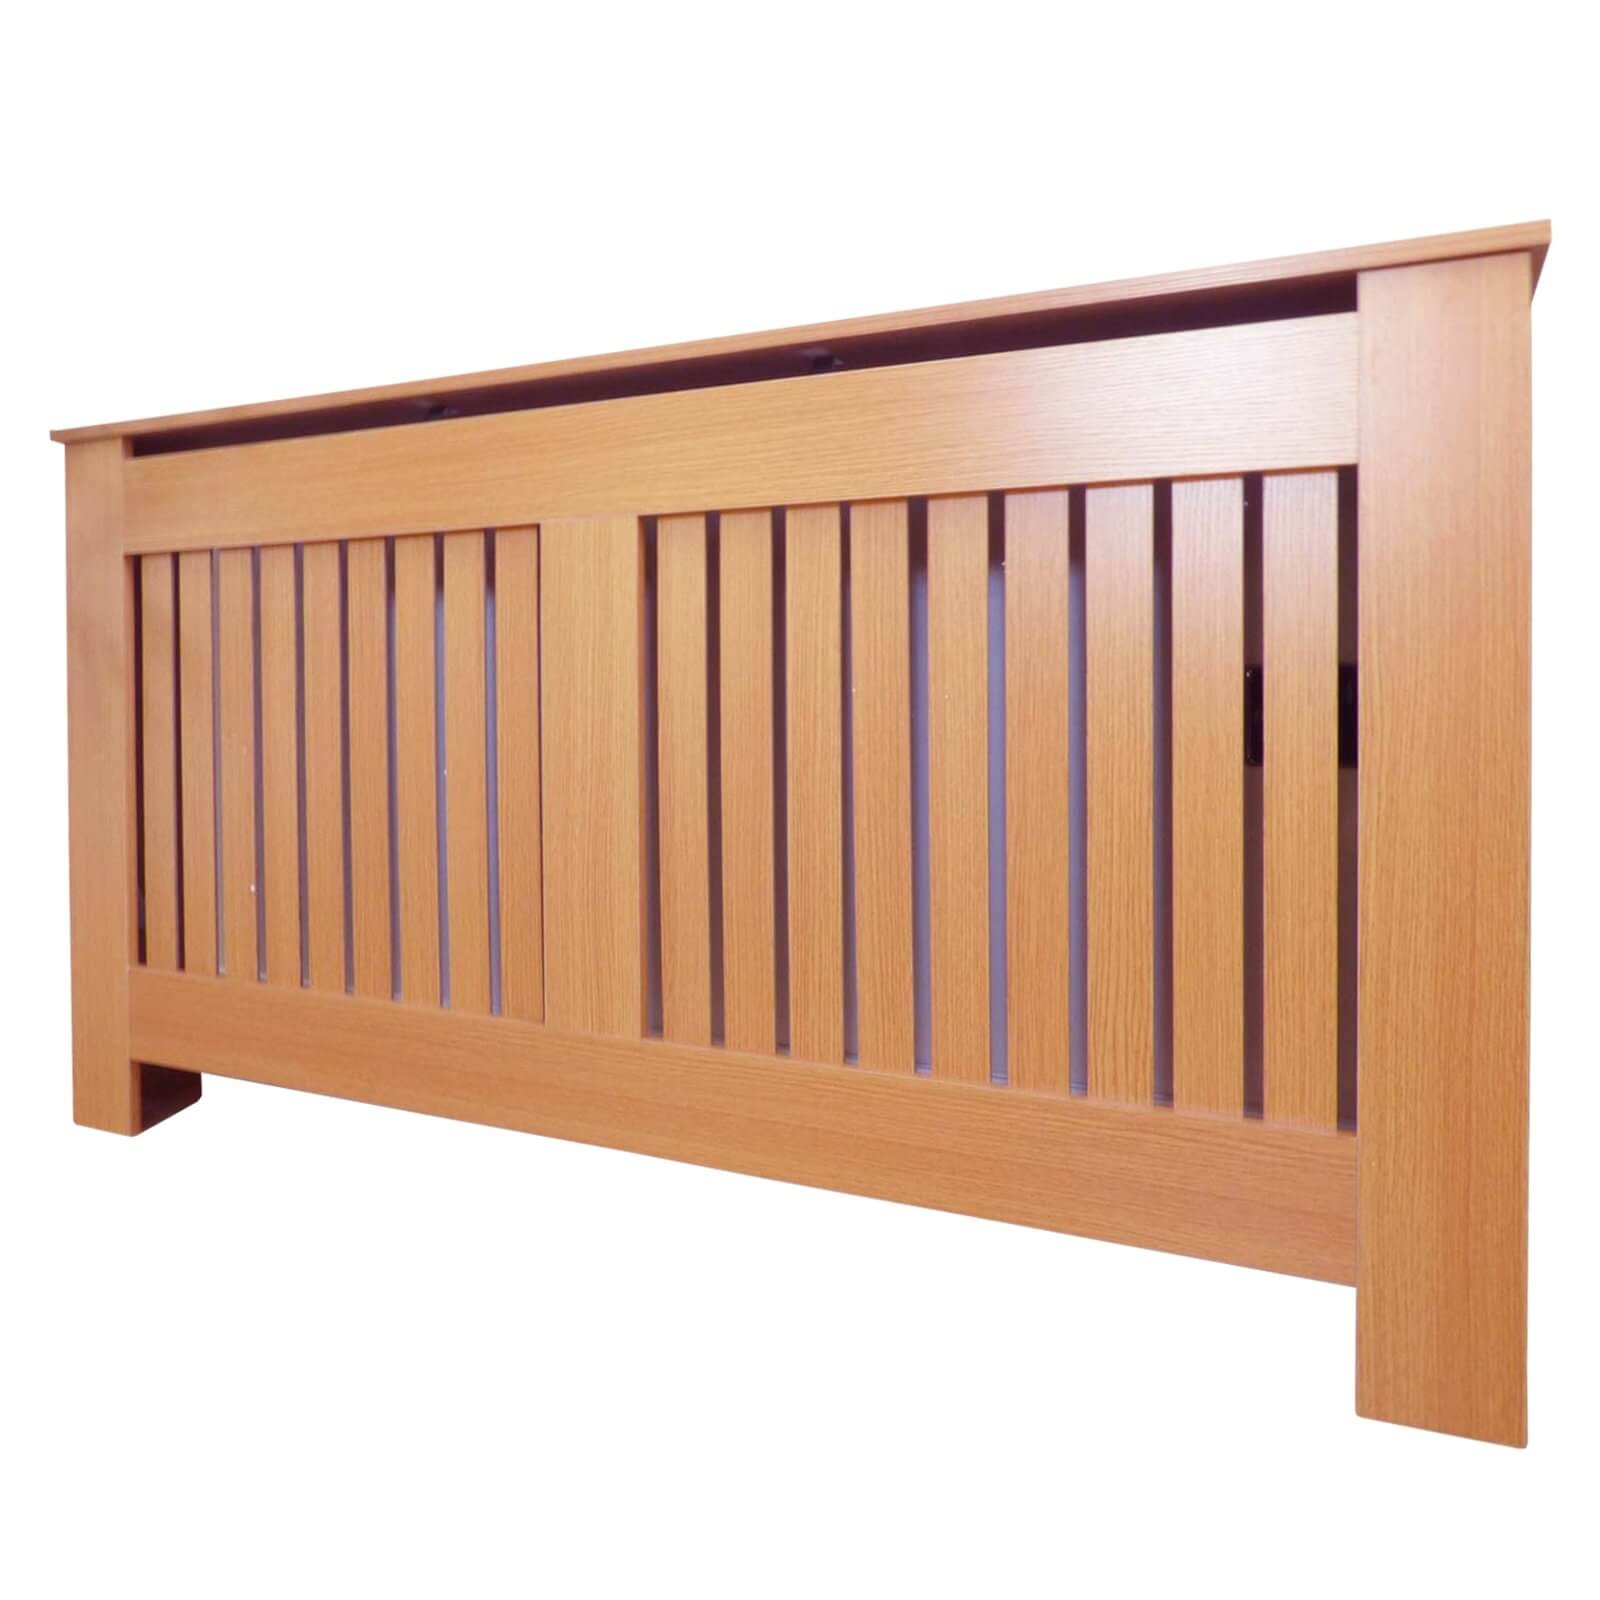 Oak Radiator Cover with Vertical Design - Large